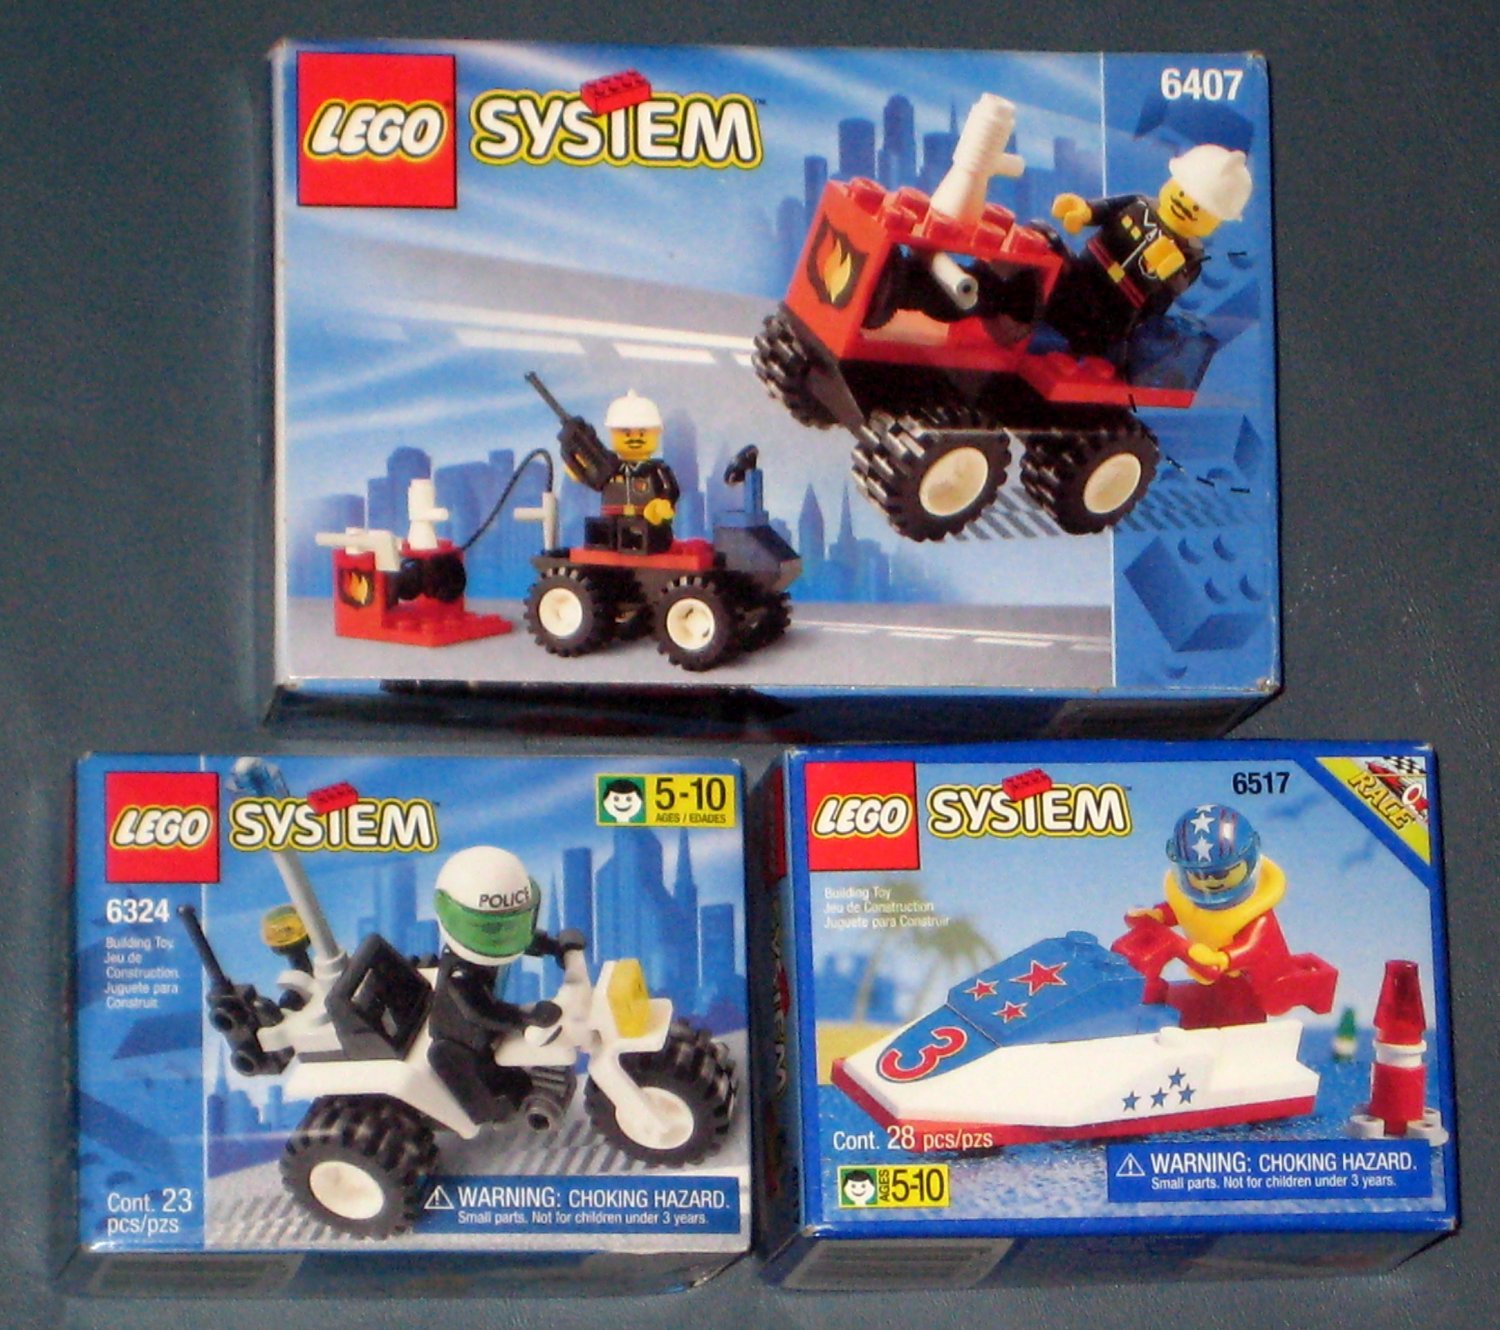 Lego System 6407 Fire Chief 6324 Chopper Cop 6517 Water Jet 3